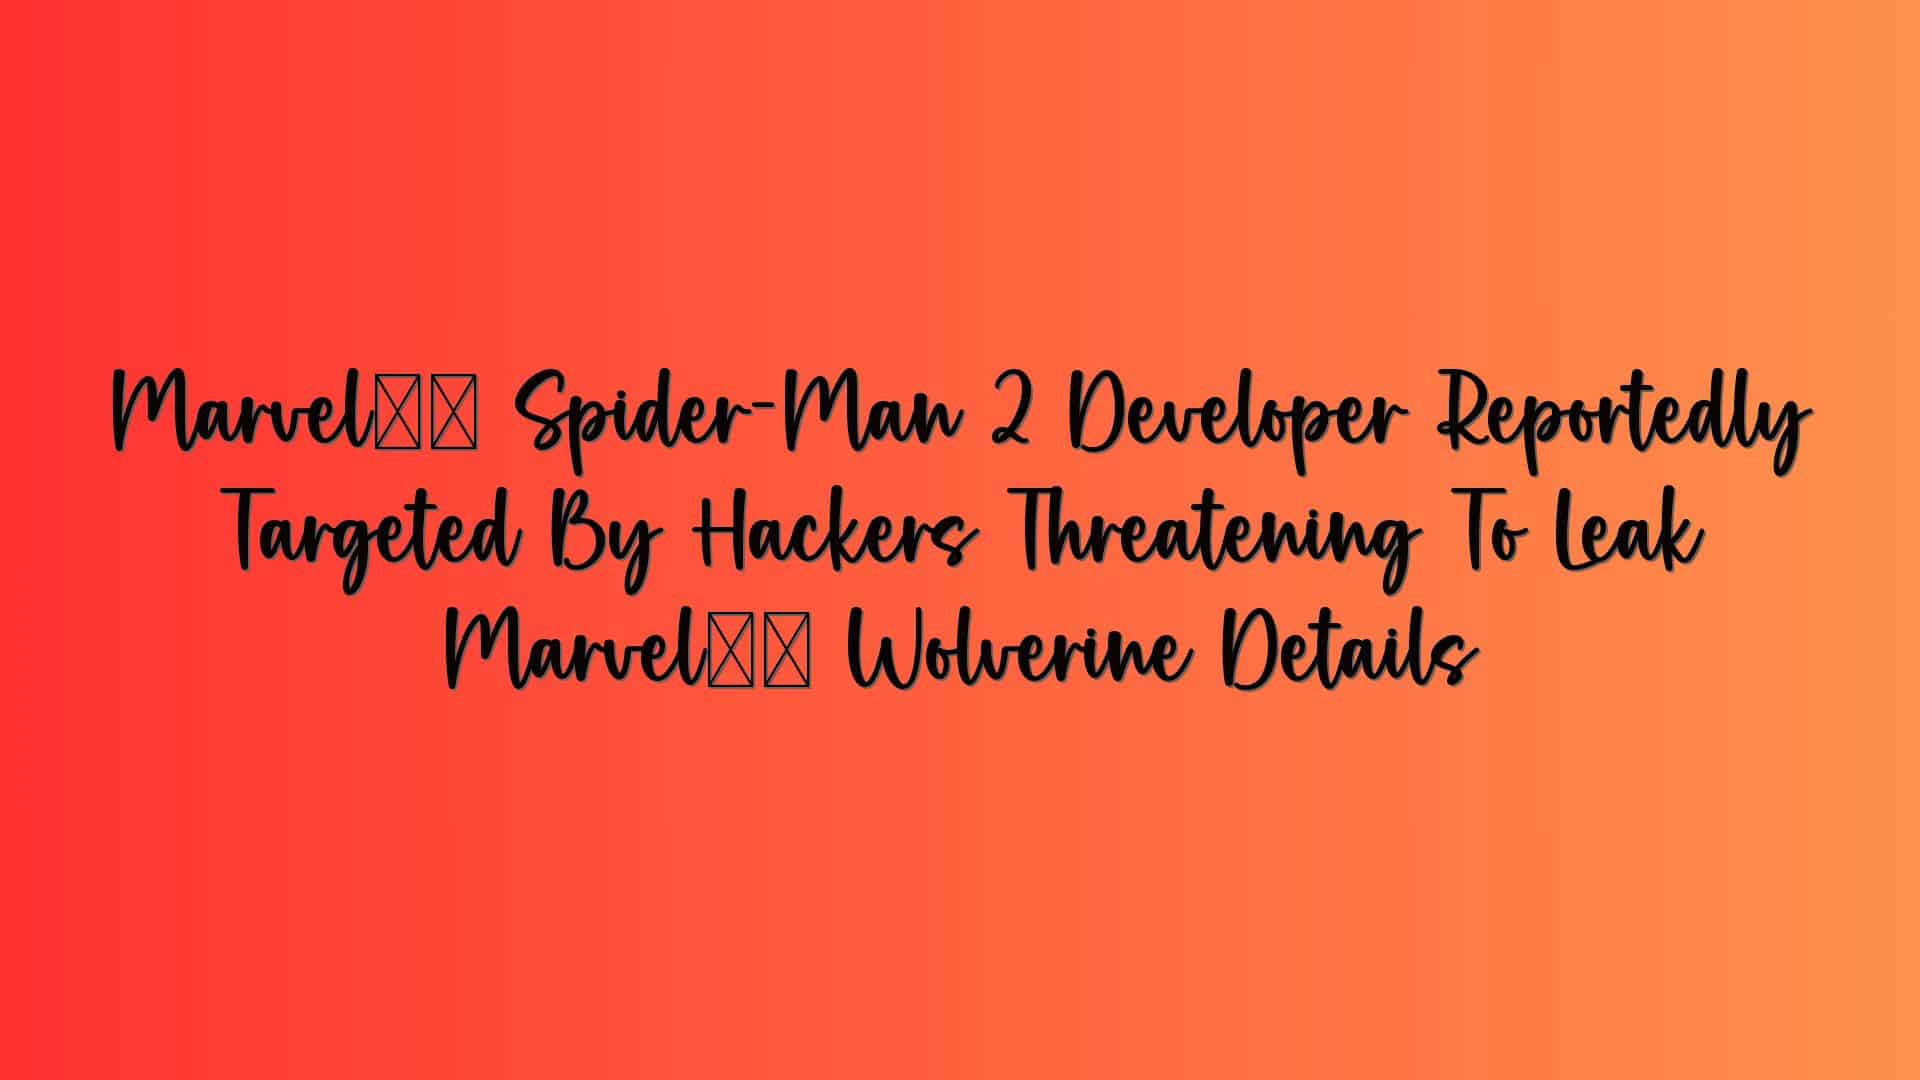 Marvel’s Spider-Man 2 Developer Reportedly Targeted By Hackers Threatening To Leak Marvel’s Wolverine Details